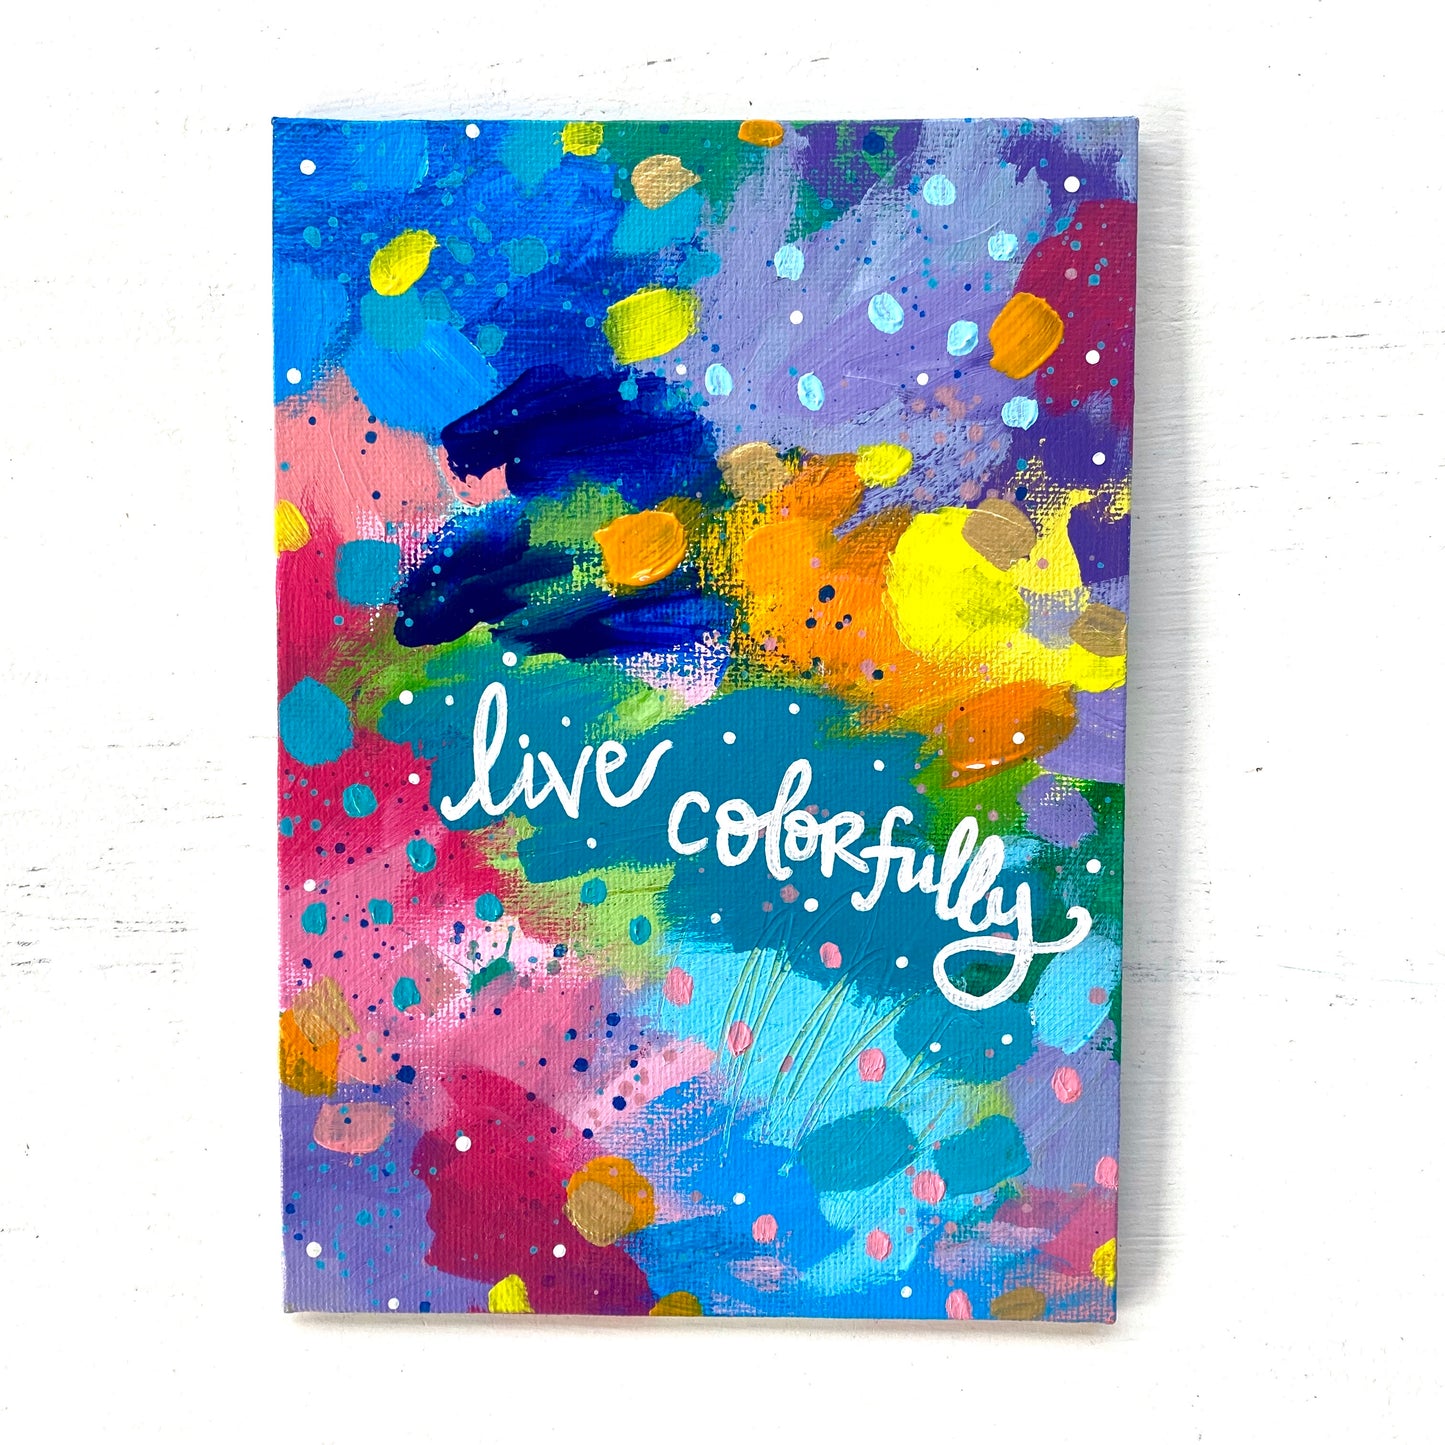 August 2020 Daily Painting Day 28 “Live Colorfully” 5x7 inch original